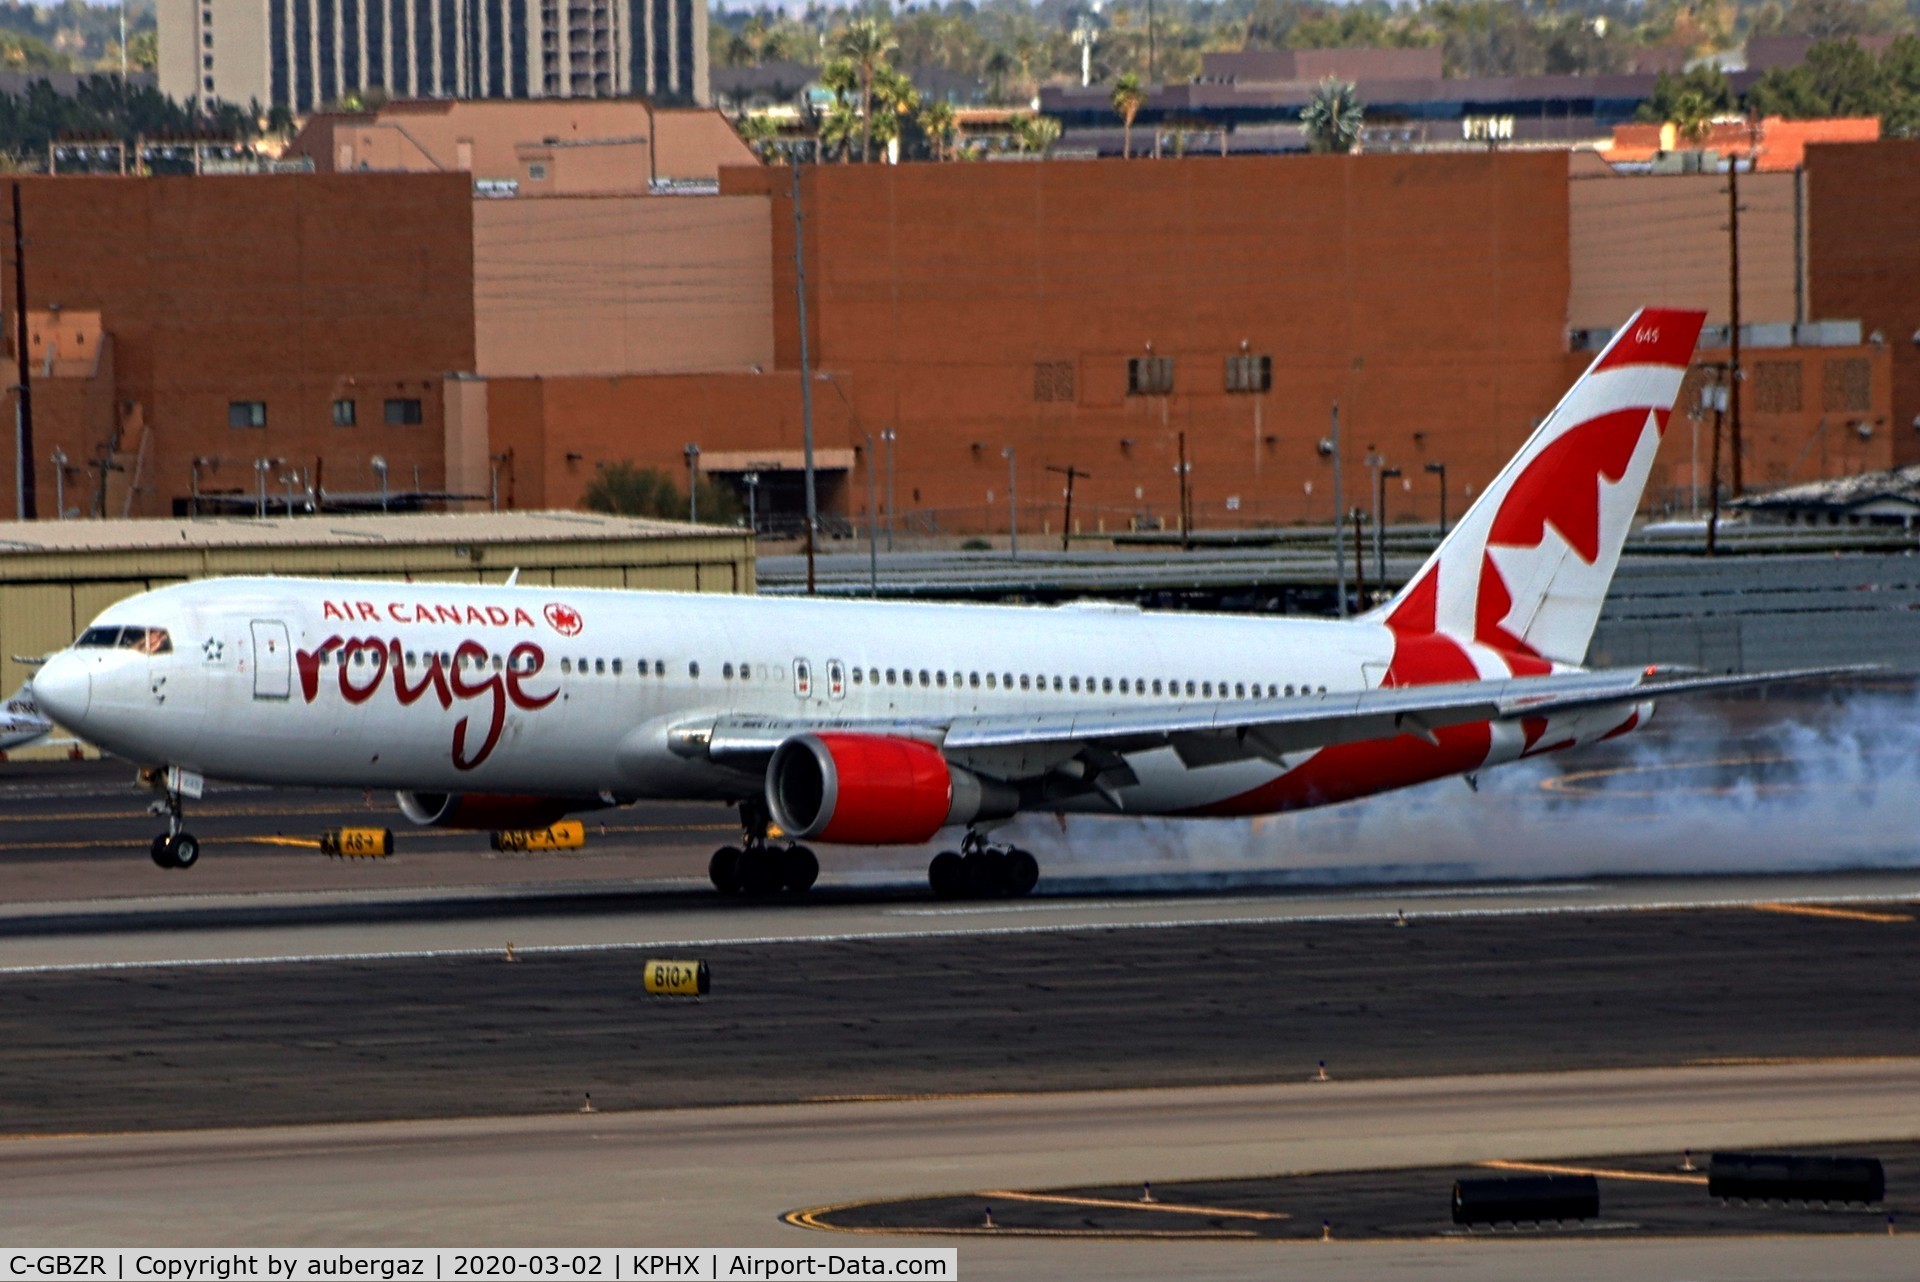 C-GBZR, 1982 Boeing 767-38E/ER C/N 25404, AC ROUGE Arrival at PHX R26